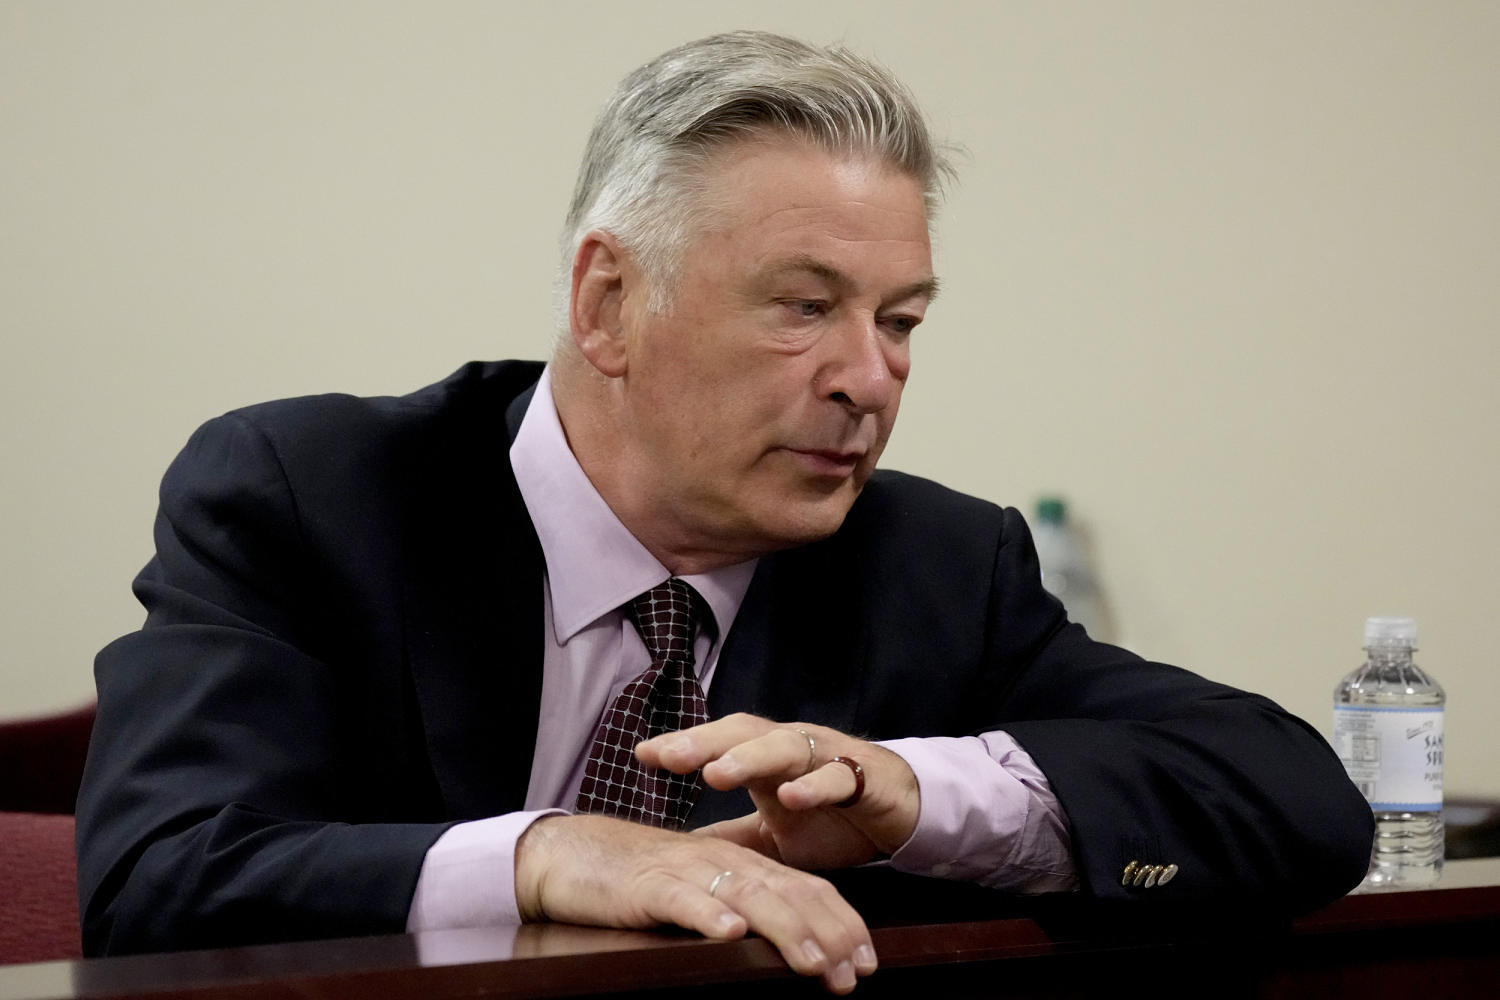 First day of Alec Baldwin's manslaughter trial sees new bodycam video, preview of witnesses to come